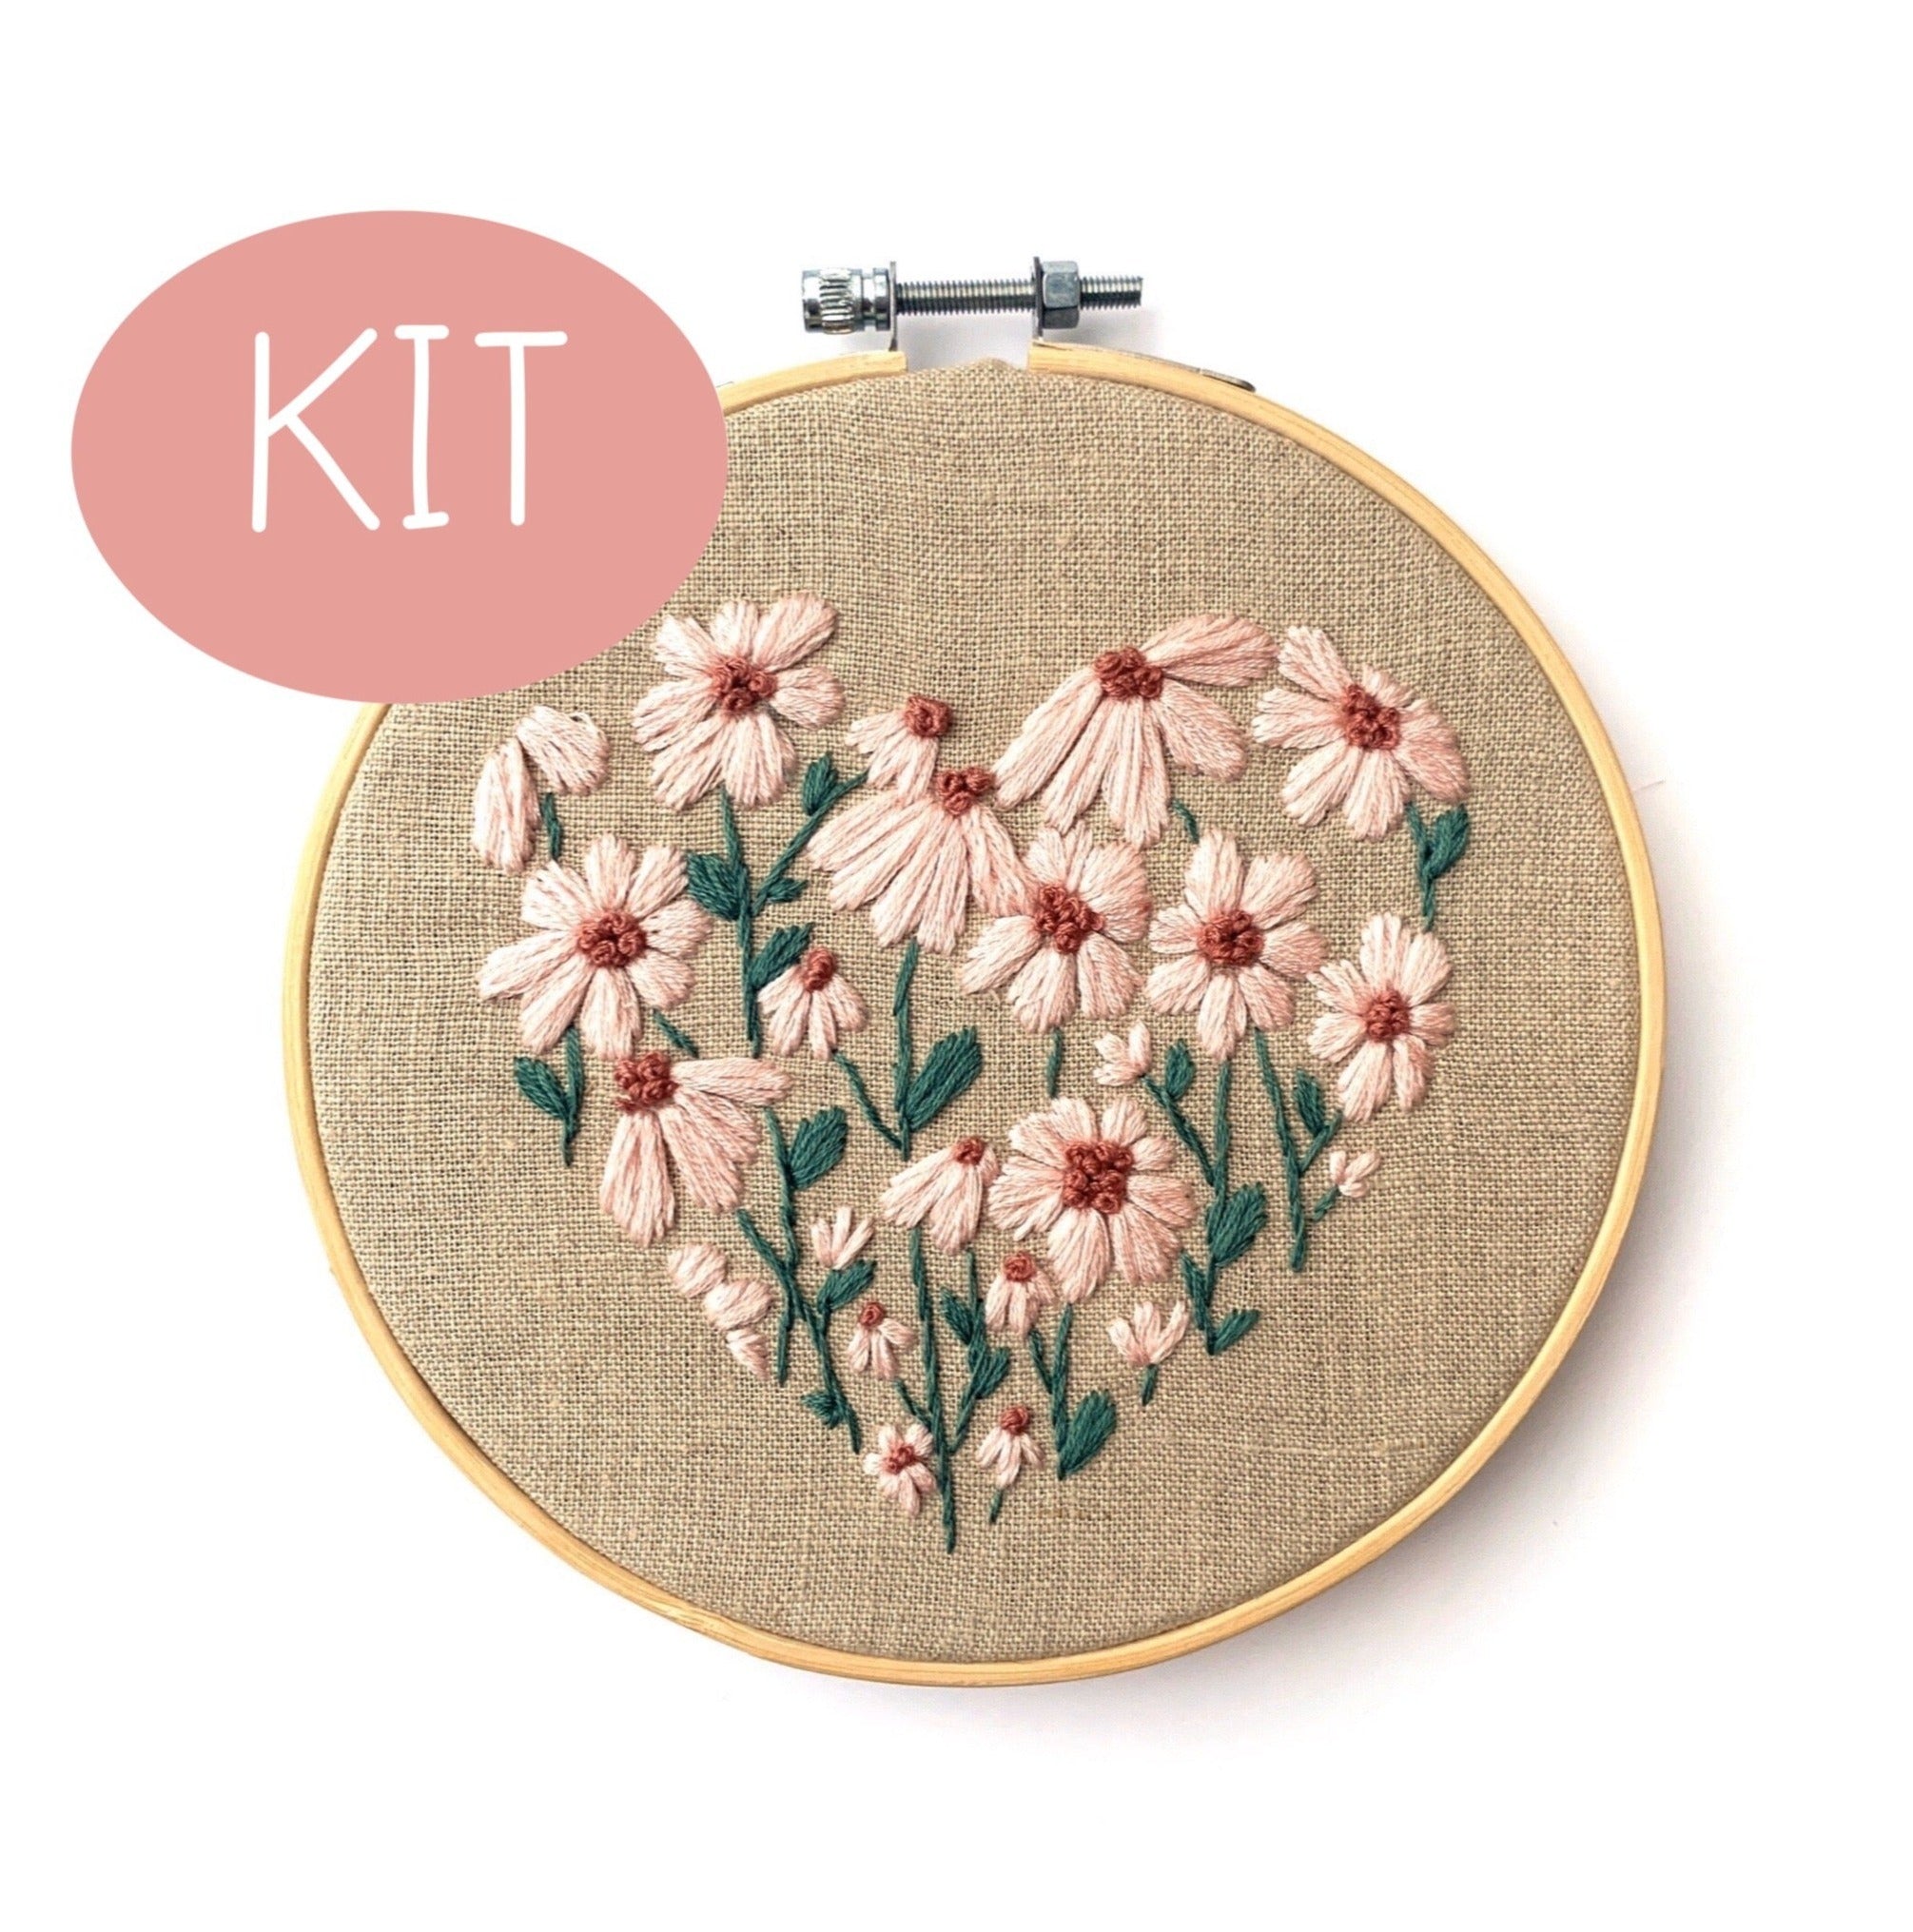 Floral Love Heart Embroidery Kit – ohsewbootiful